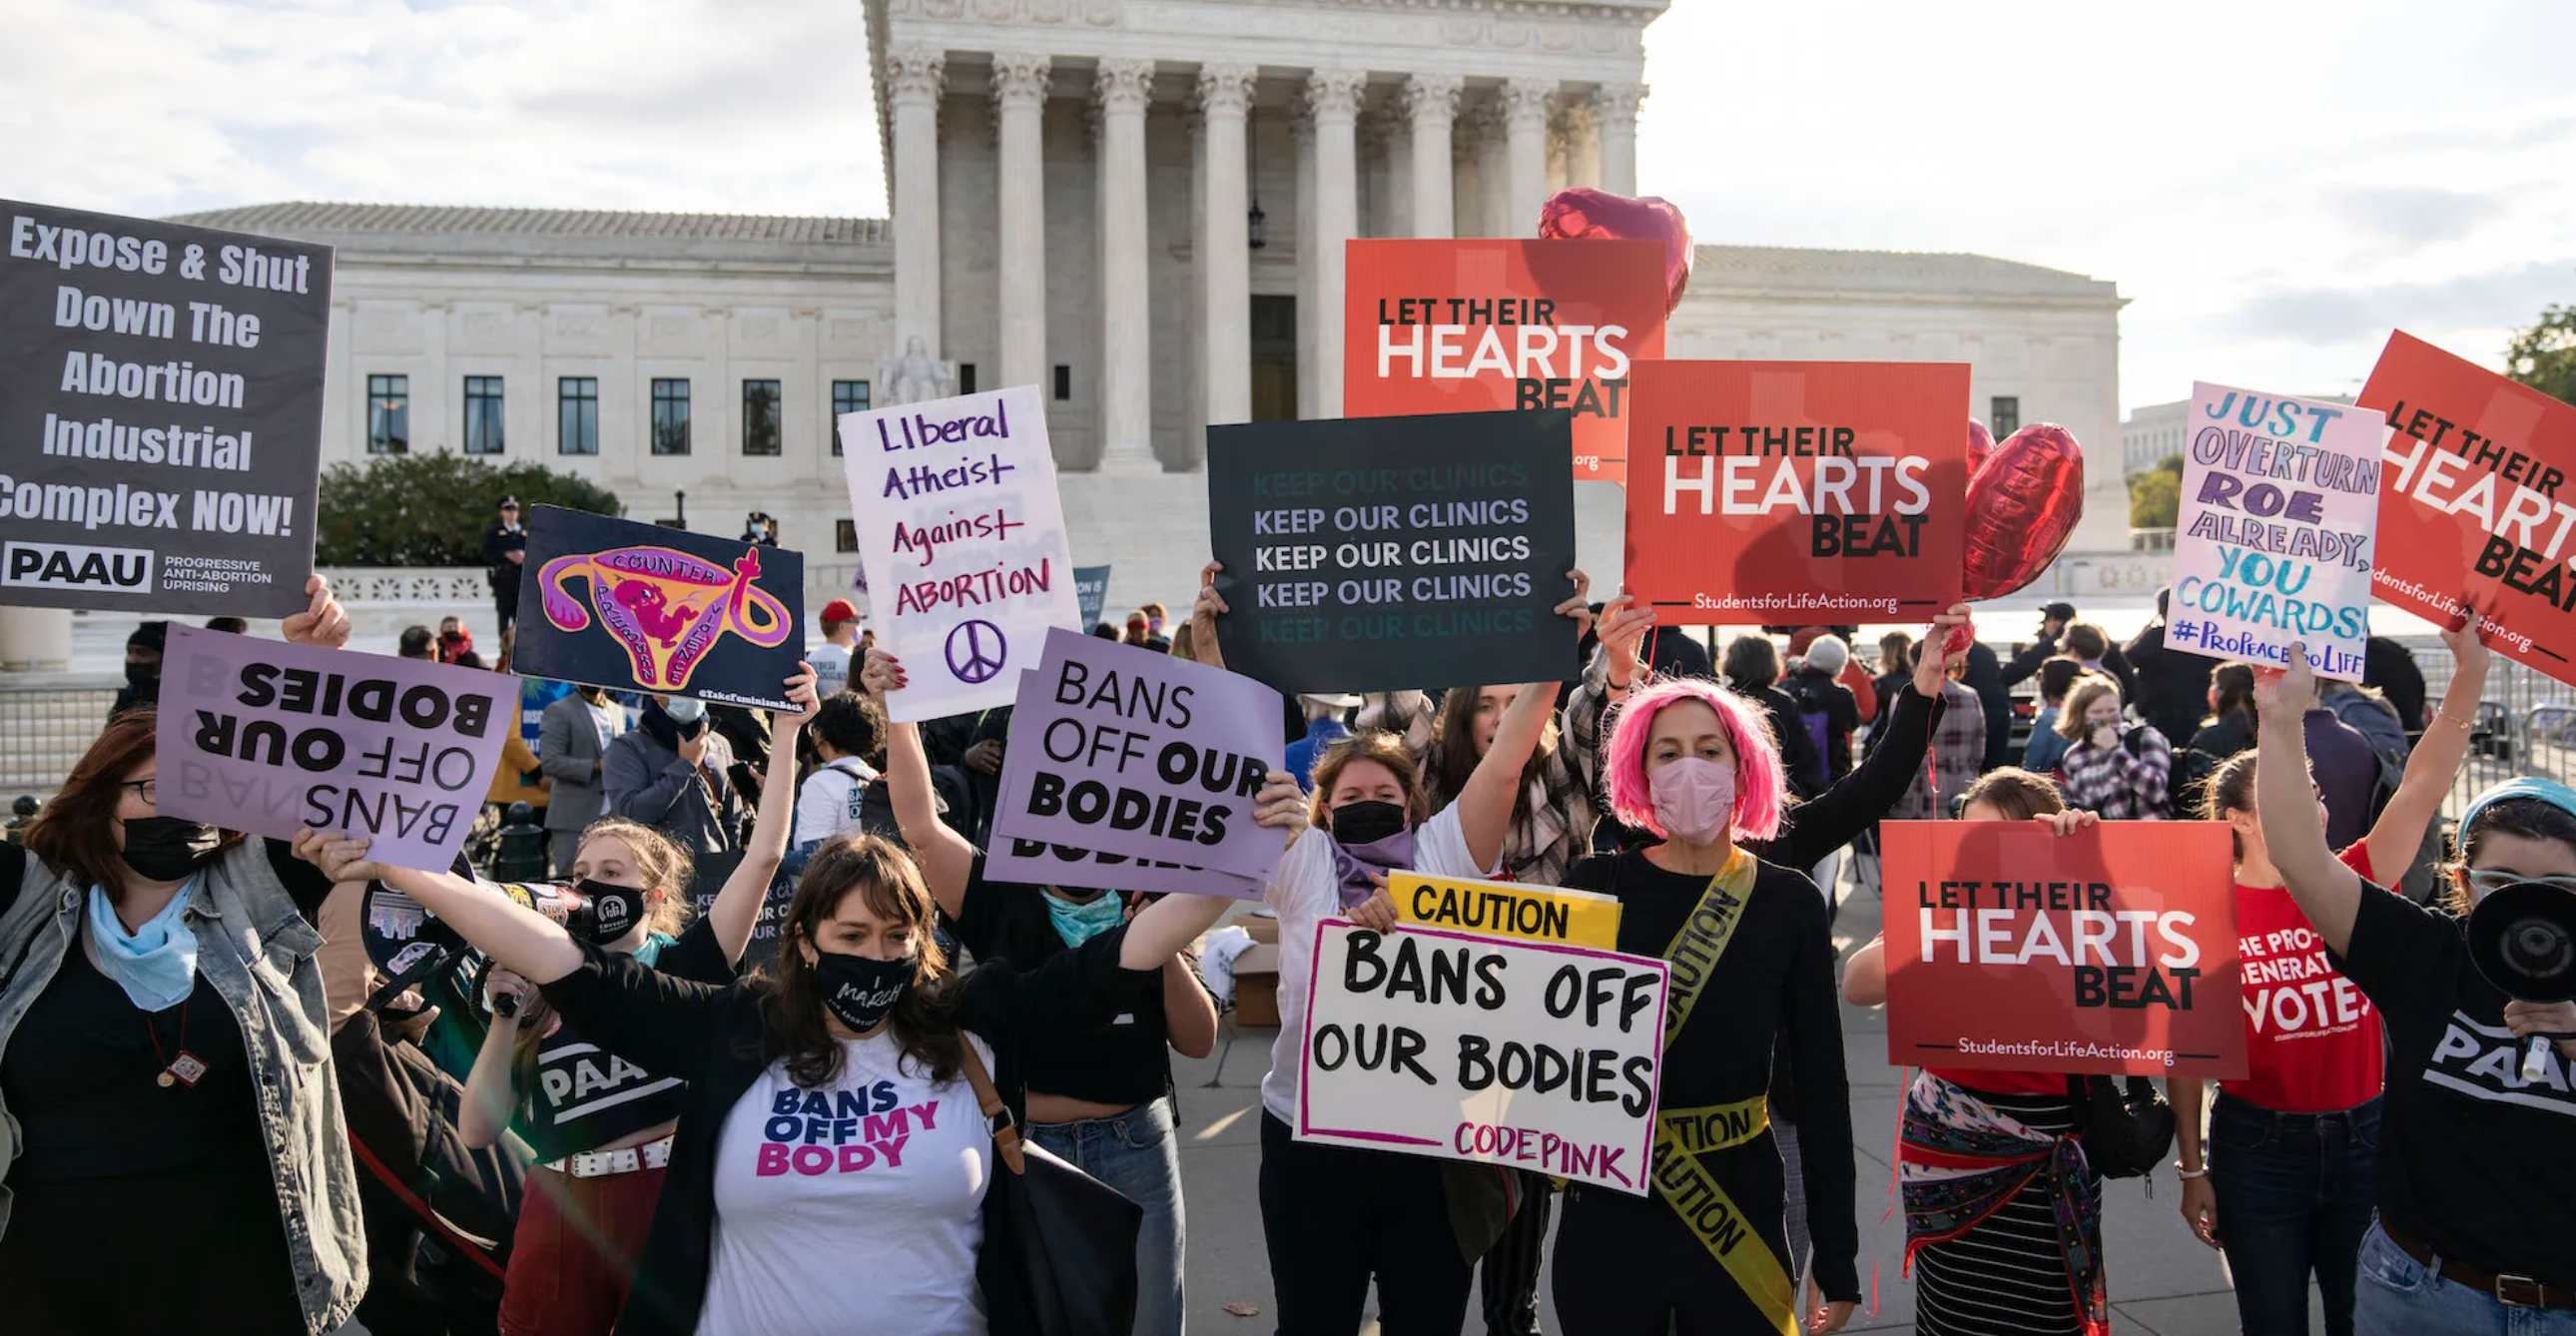 Supporters and opponents of the Texas Heartbeat Act demonstrate in front of the U.S. Supreme Court in November. Credit: Drew Angerer/Getty Images.